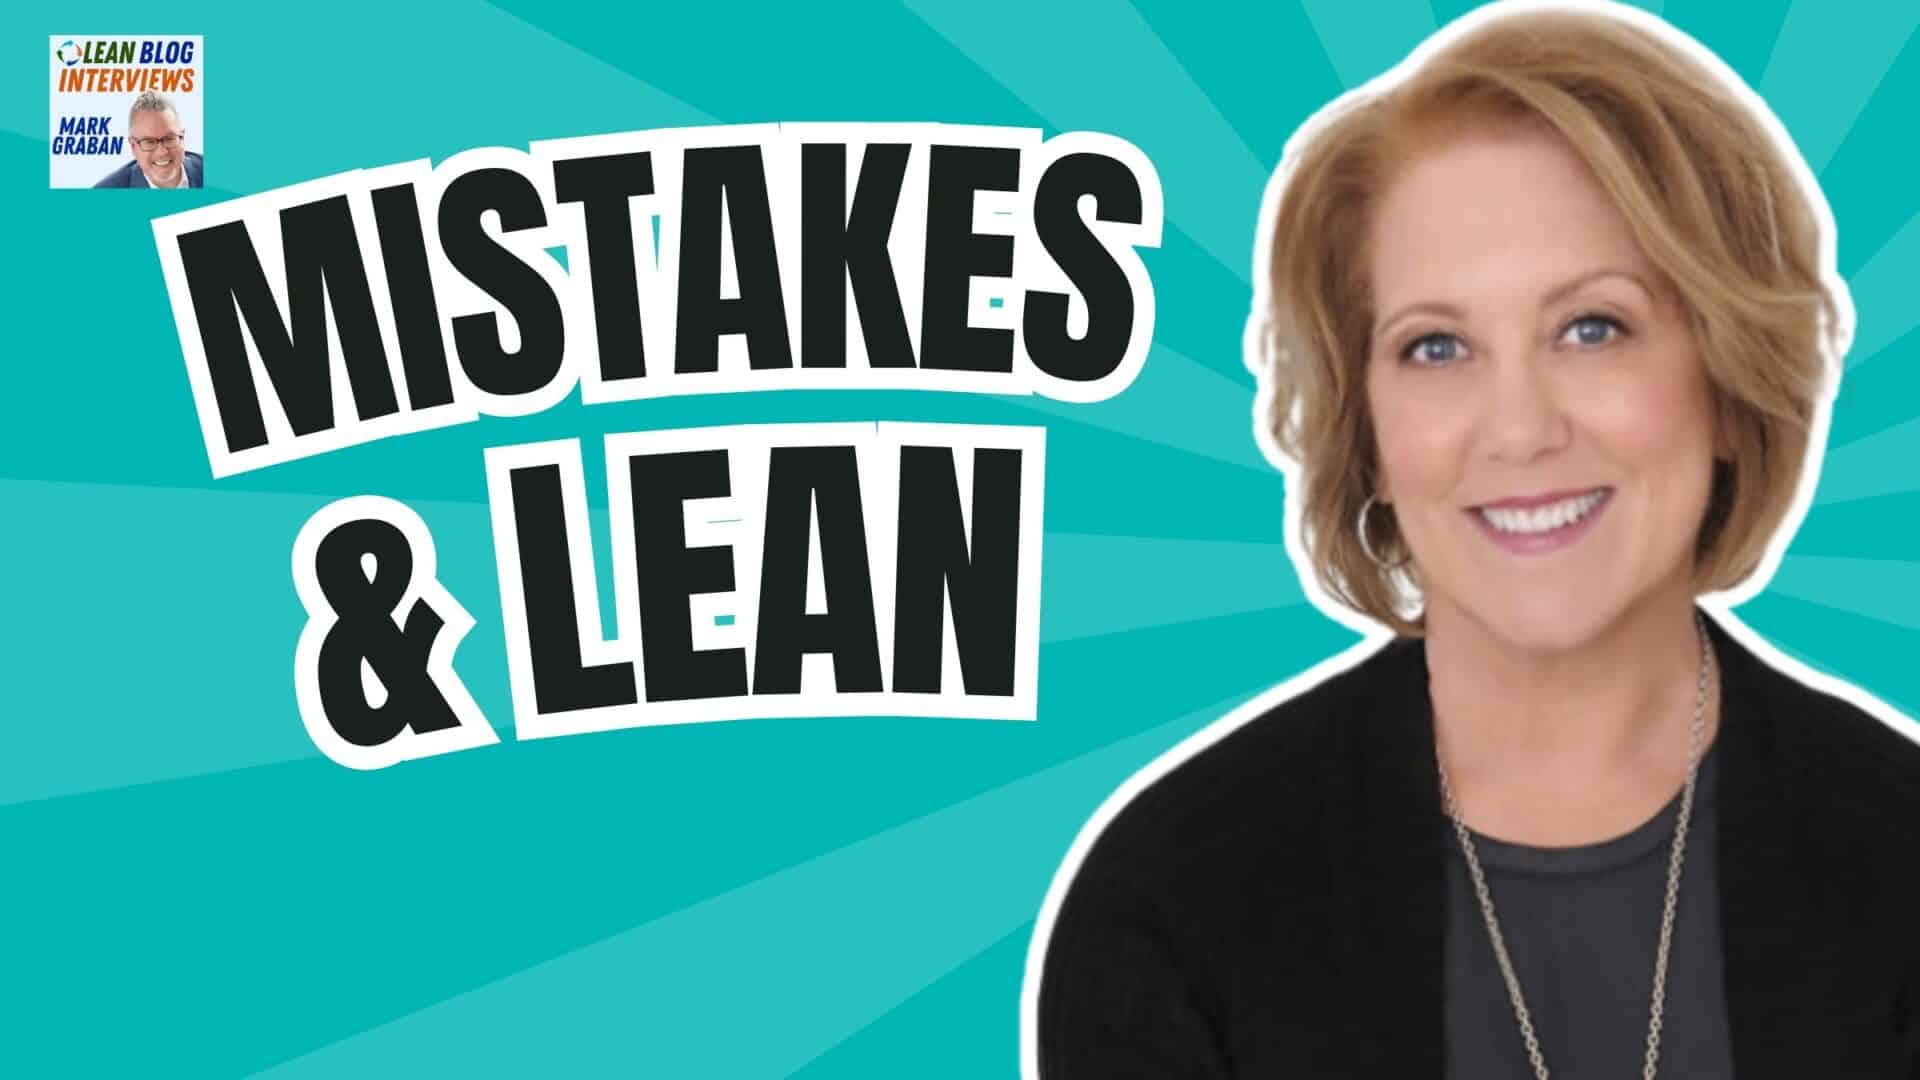 The image is a promotional cover for the Lean Blog Interviews podcast, Episode 510. It features a teal background with rays emanating from the center. The title "MISTAKES & LEAN" is prominently displayed in bold, black letters with a white outline. The episode number "Episode 510" is written below the title. On the right side, there is a photo of Karen Martin, smiling and looking towards the camera. In the top left corner, there is a smaller image of Mark Graban with the text "Lean Blog Interviews" and his name, "Mark Graban."